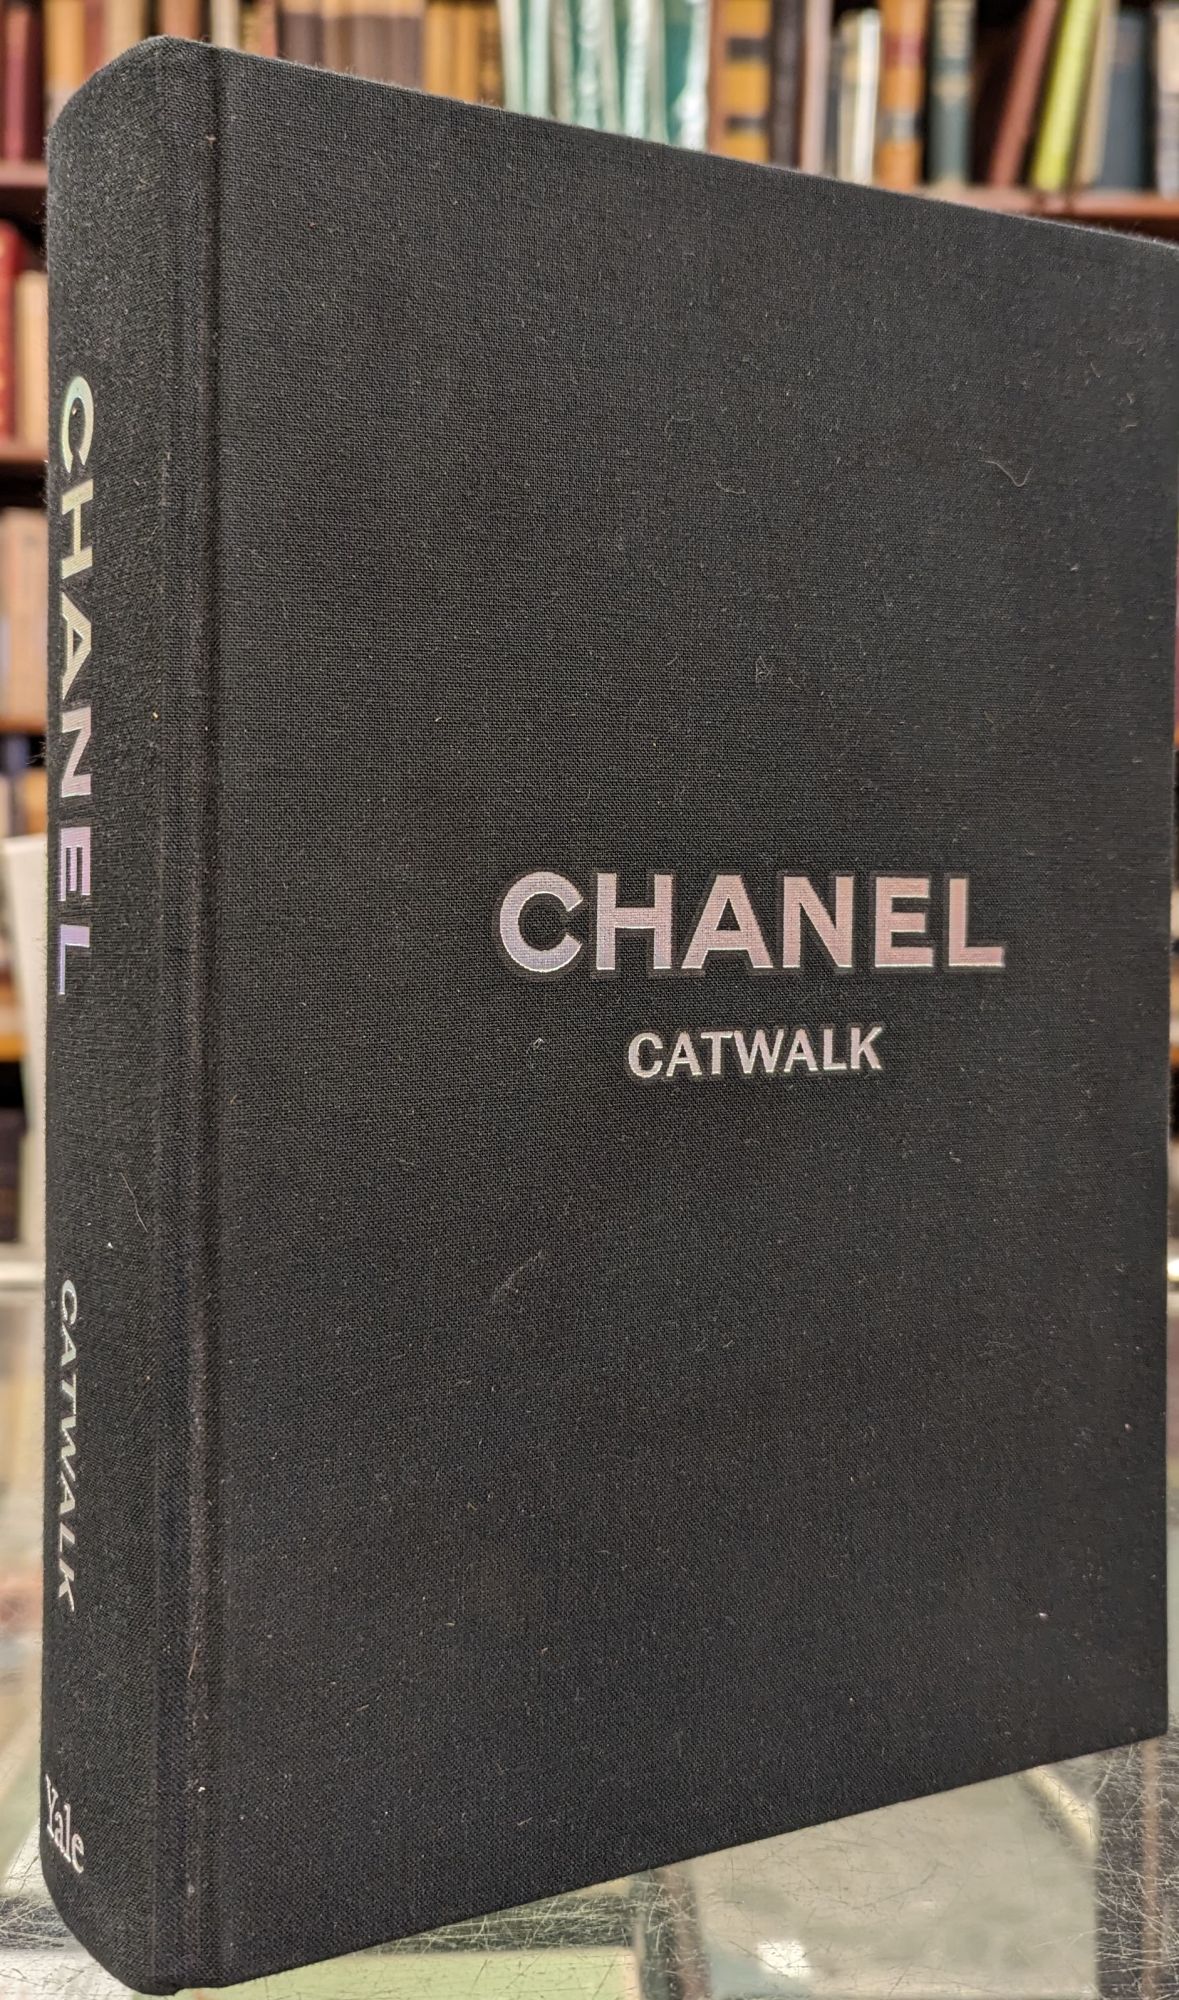 chanel catwalk the complete karl lagerfeld collections